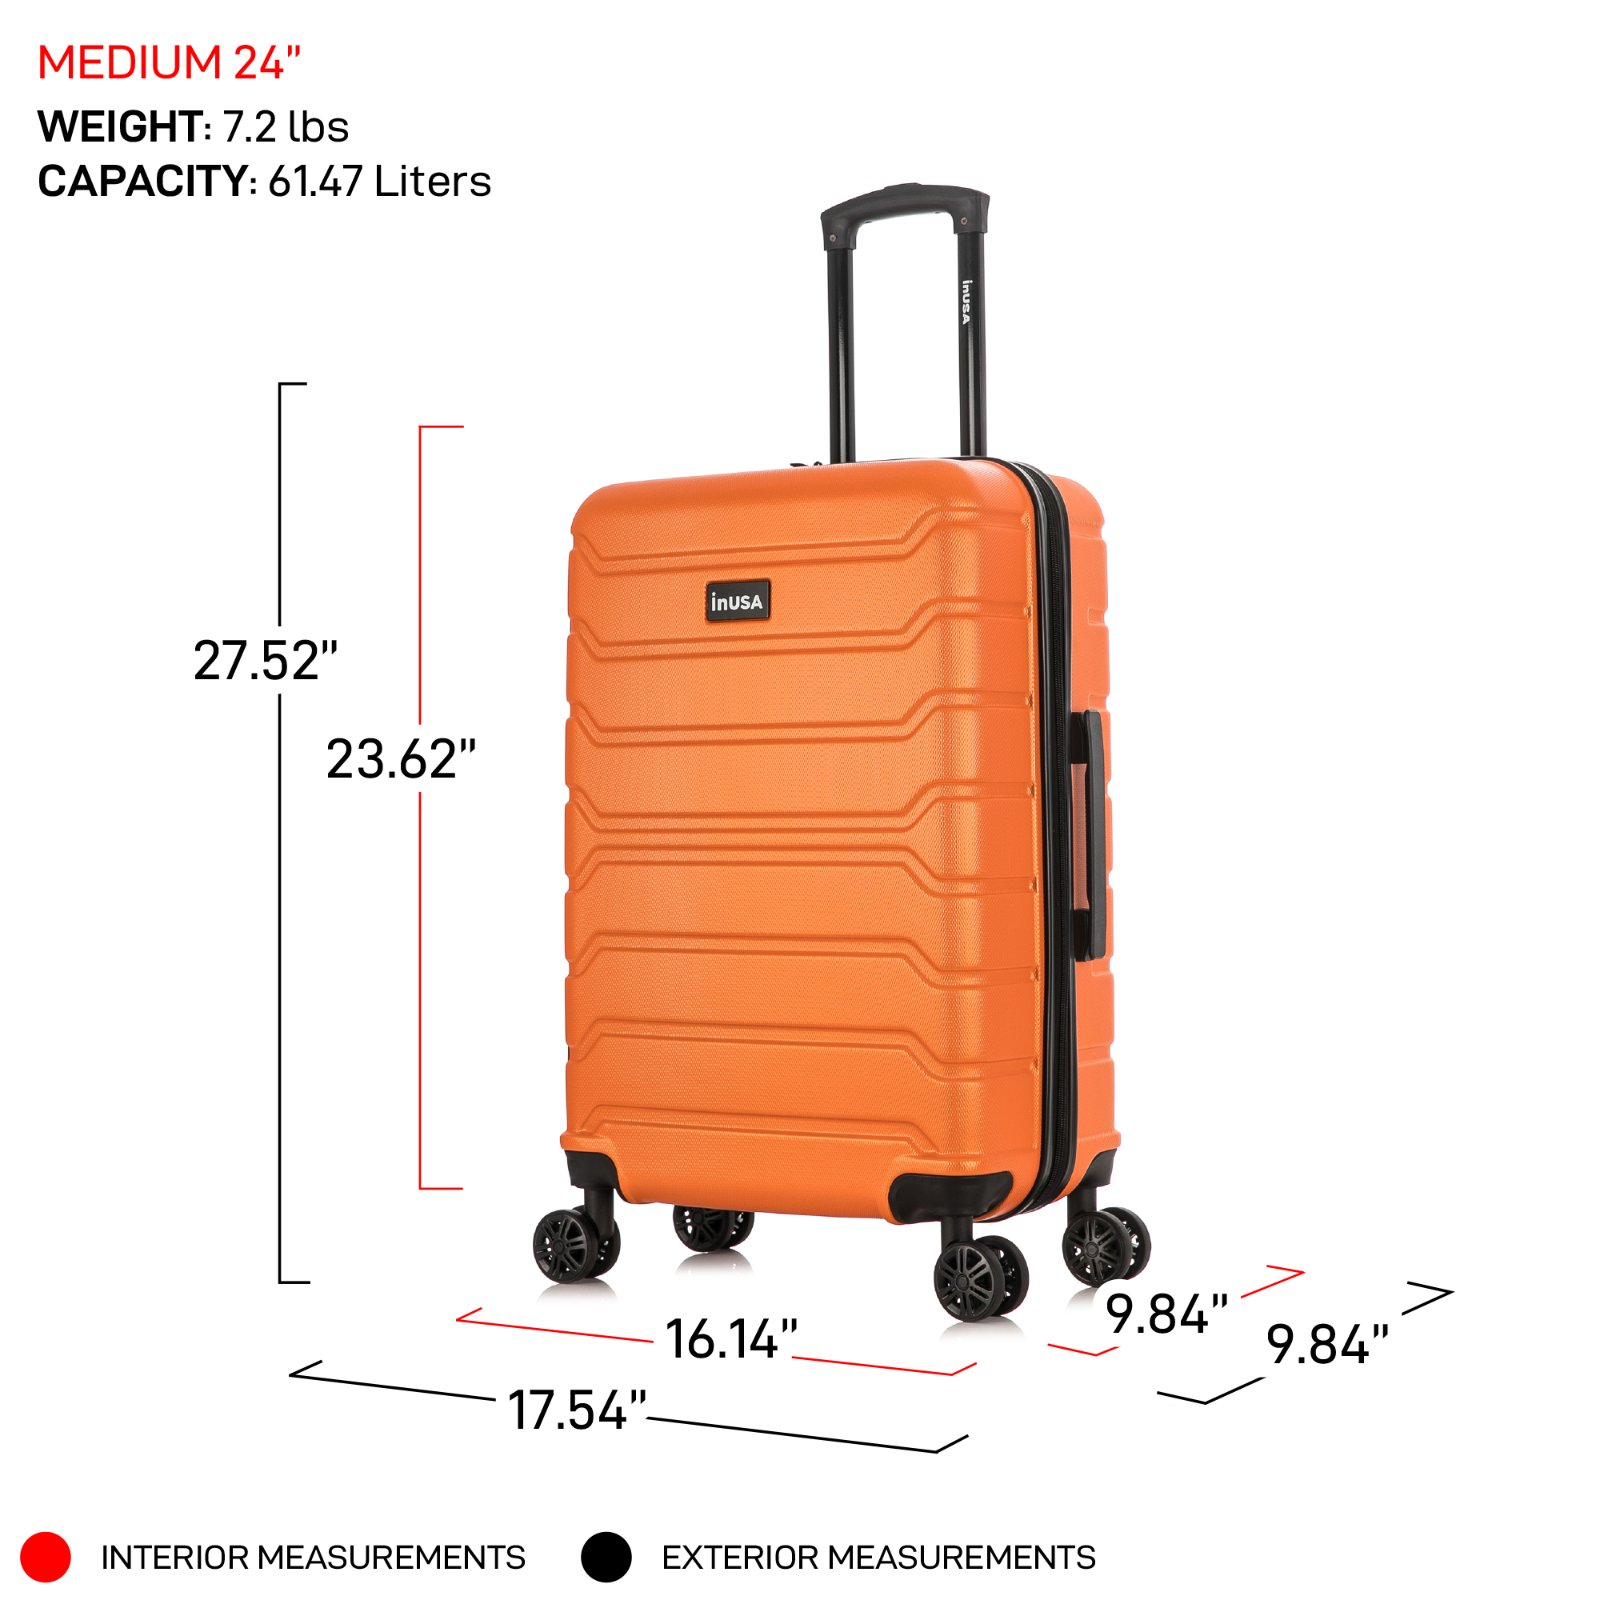 InUSA Trend 24" Hardside Lightweight Luggage with Spinner Wheels, Handle, and Trolley, Orange - image 5 of 12